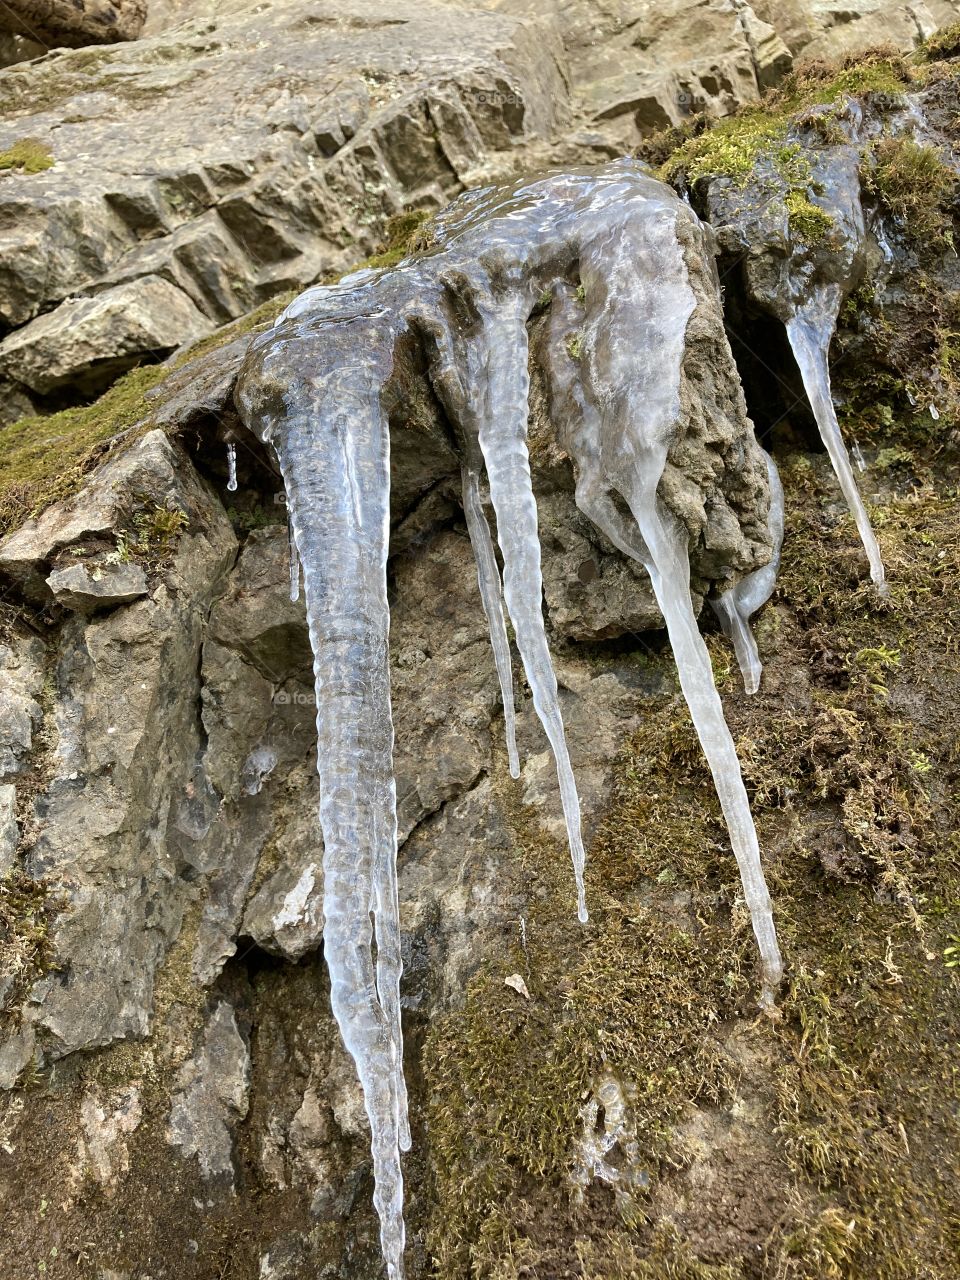 Multiple melting icicles hanging off a rock ridge